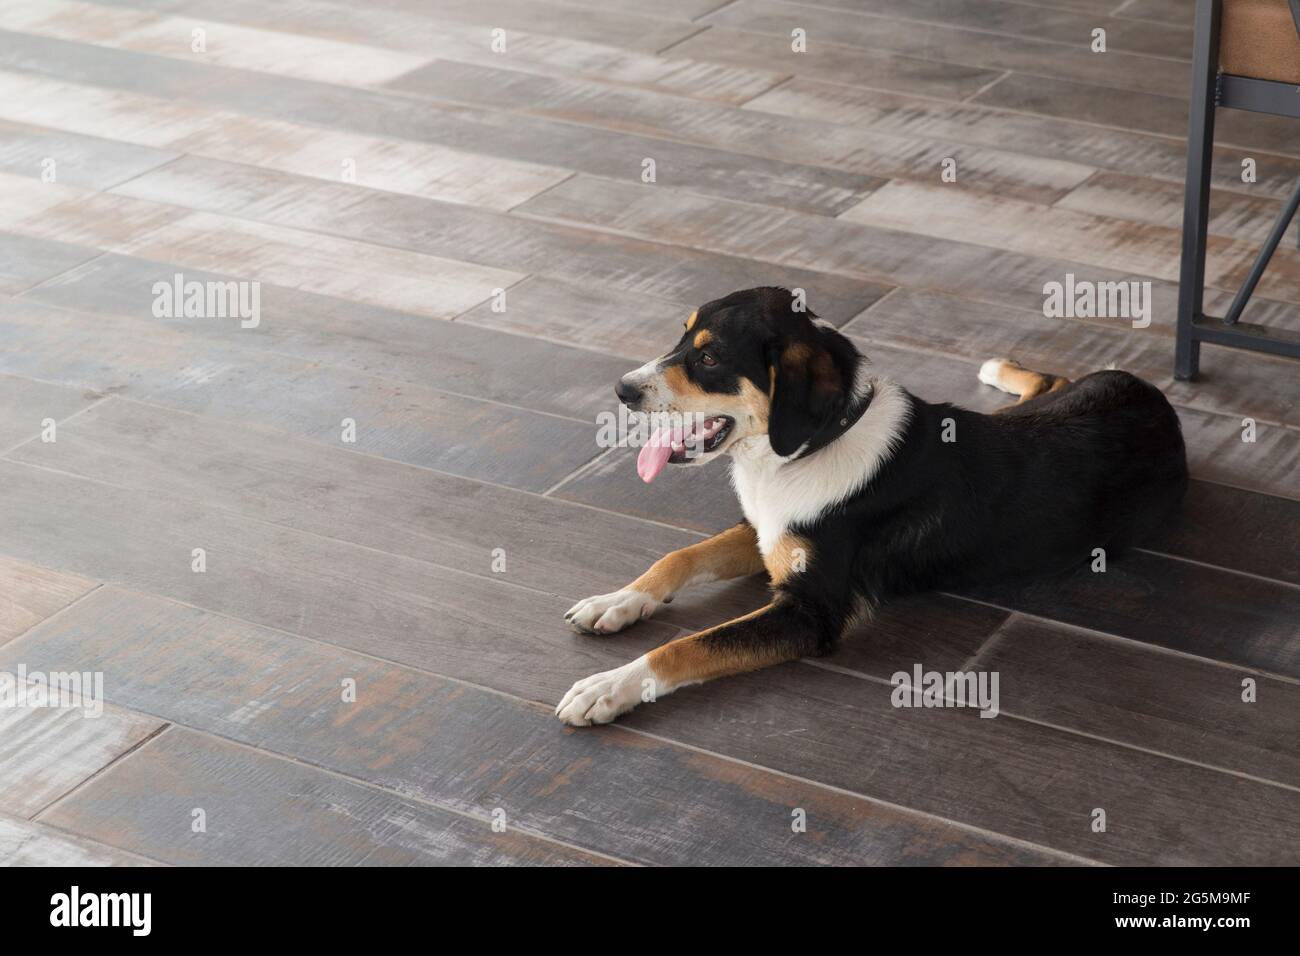 Full body portrait of a tricolor Entlebucher Mountain Dog, lying on tricolor interior ground, looking away. Stock Photo